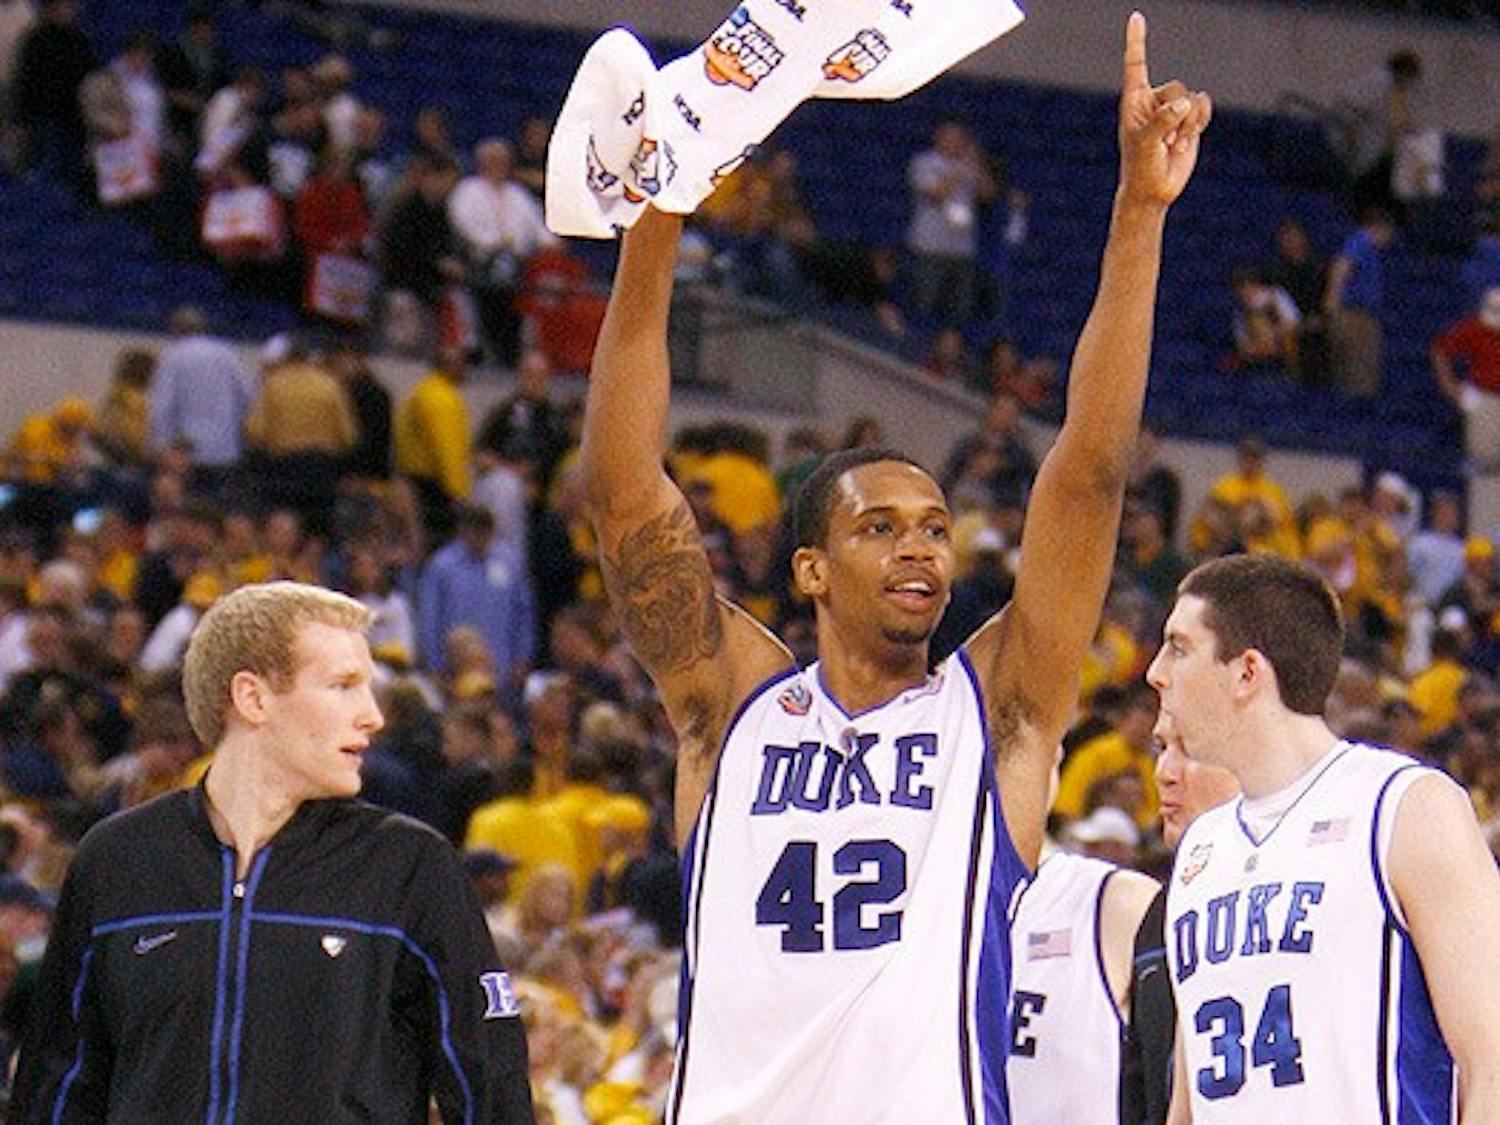 The NCAA found no violations regarding a $97,800 jewelry purchase made by former Duke basketball player Lance Thomas during his senior season.